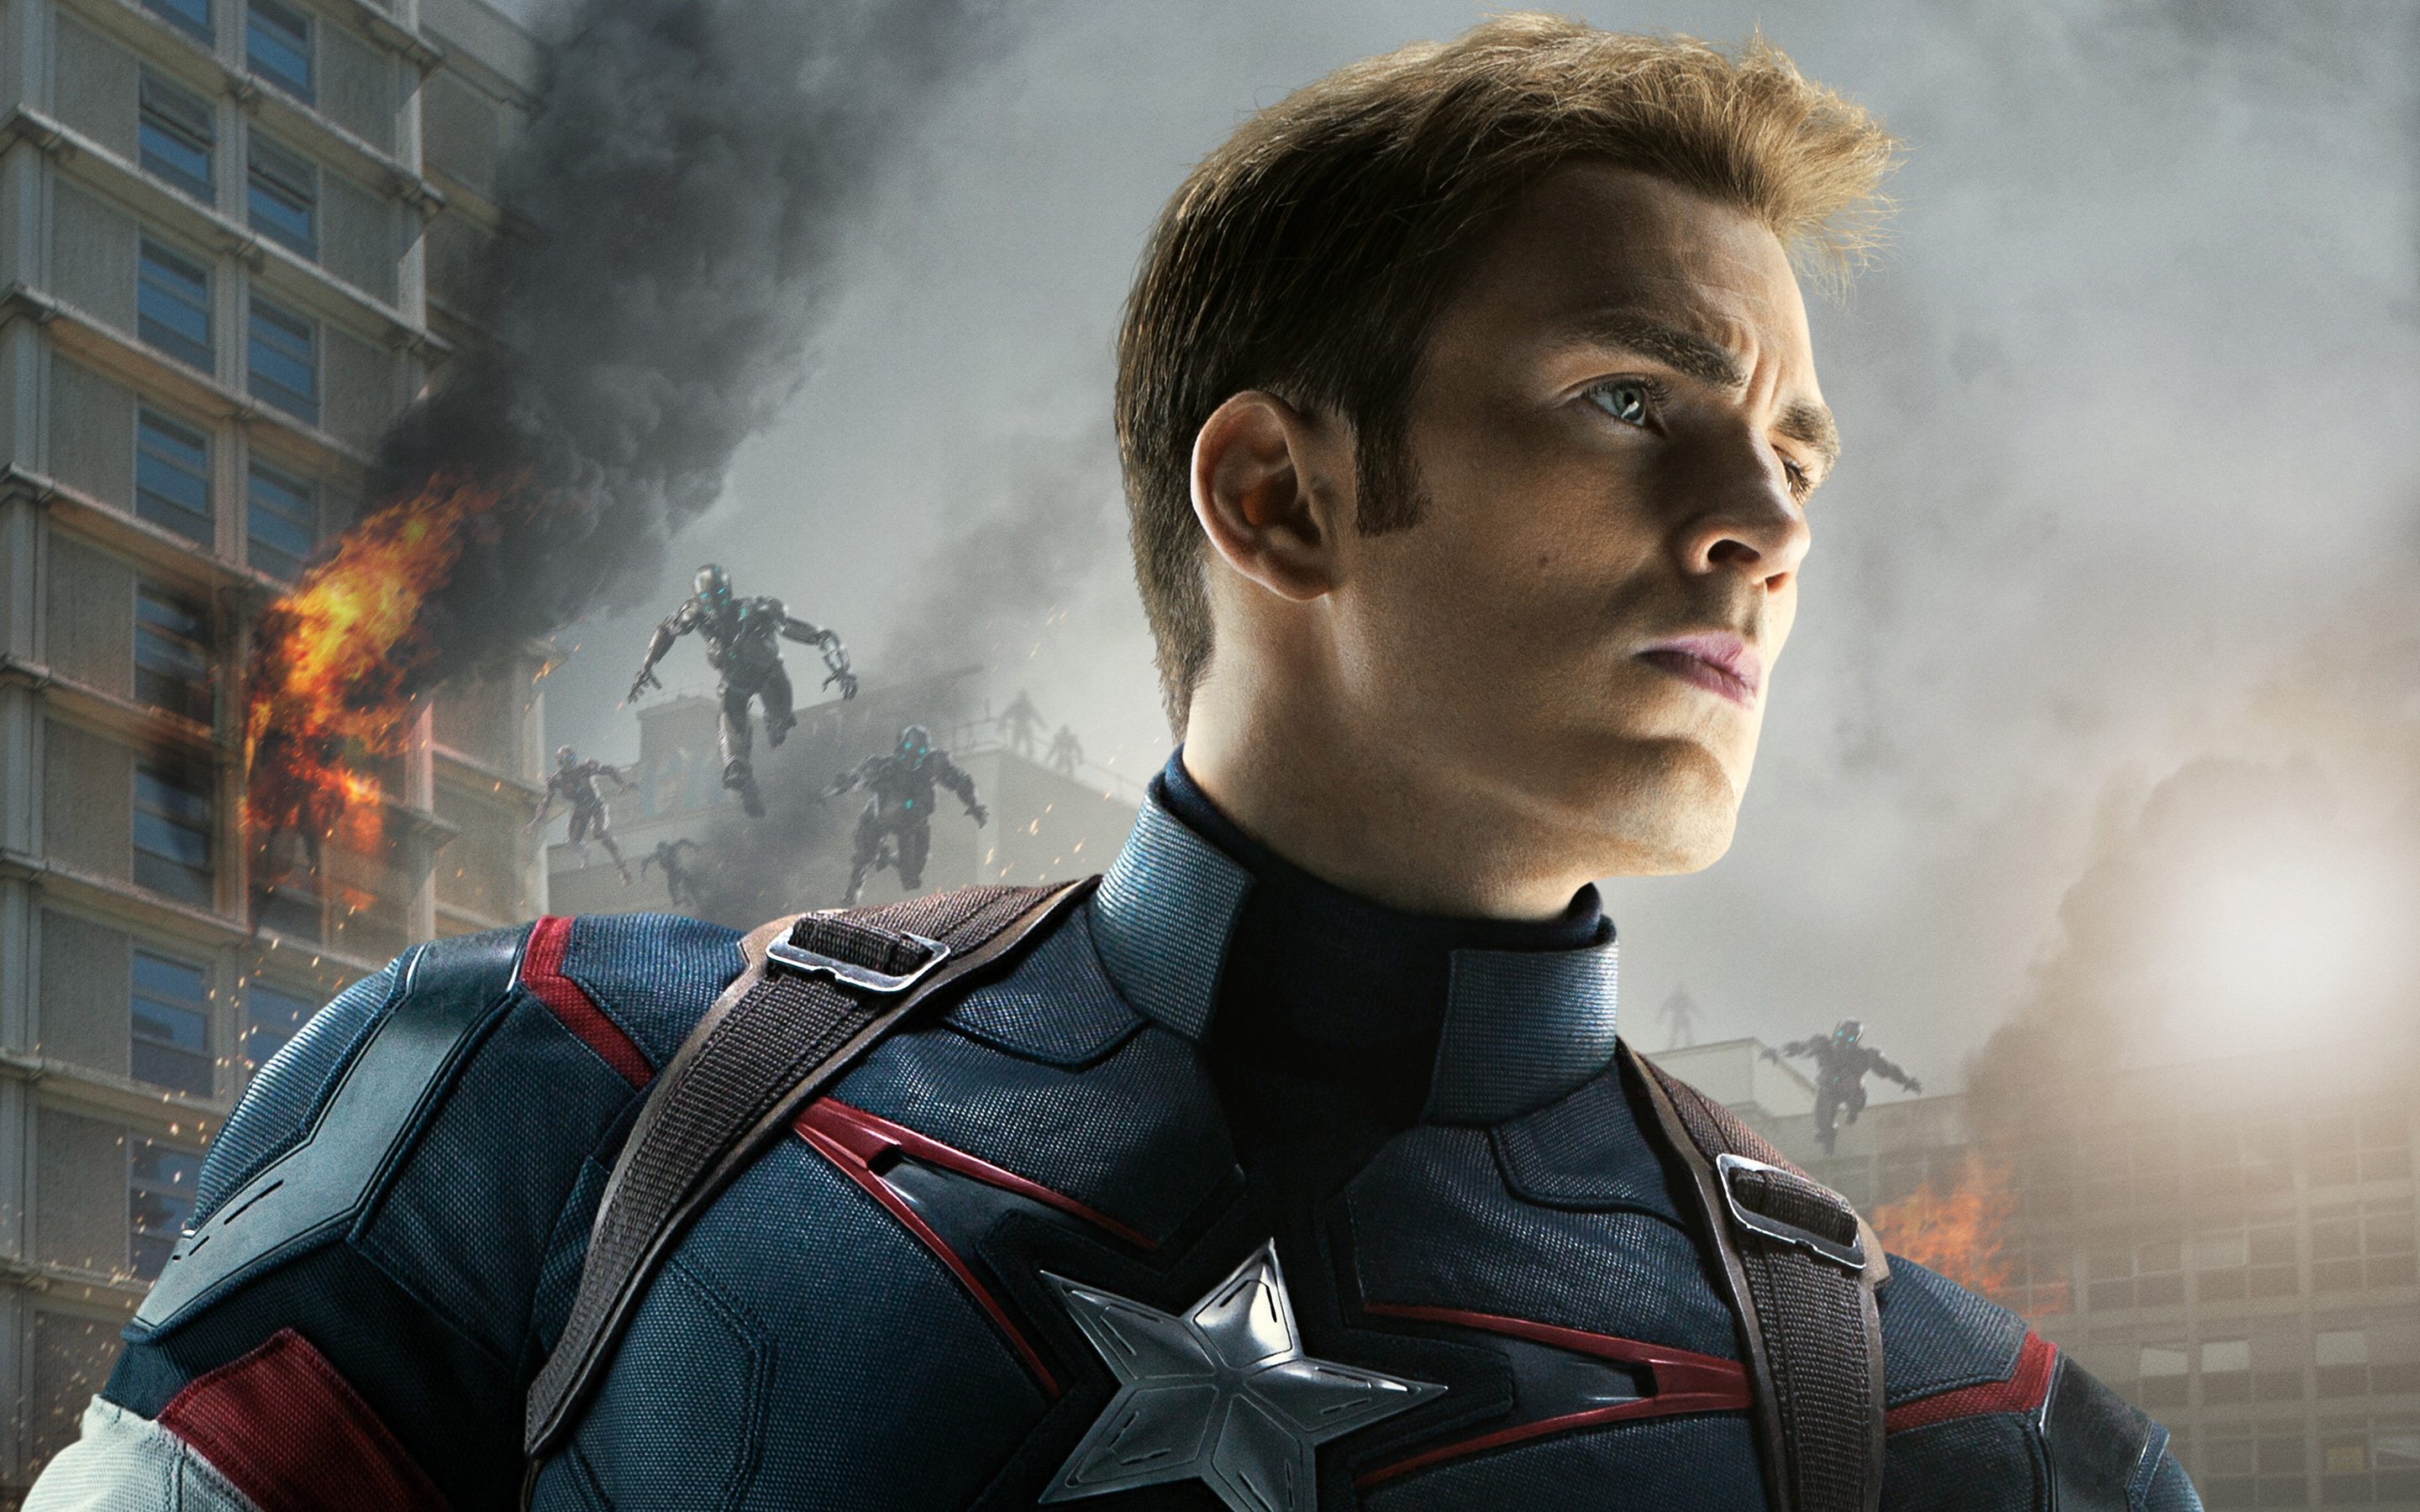 Captain America Avengers Age of Ultron Wallpapers HD Wallpapers